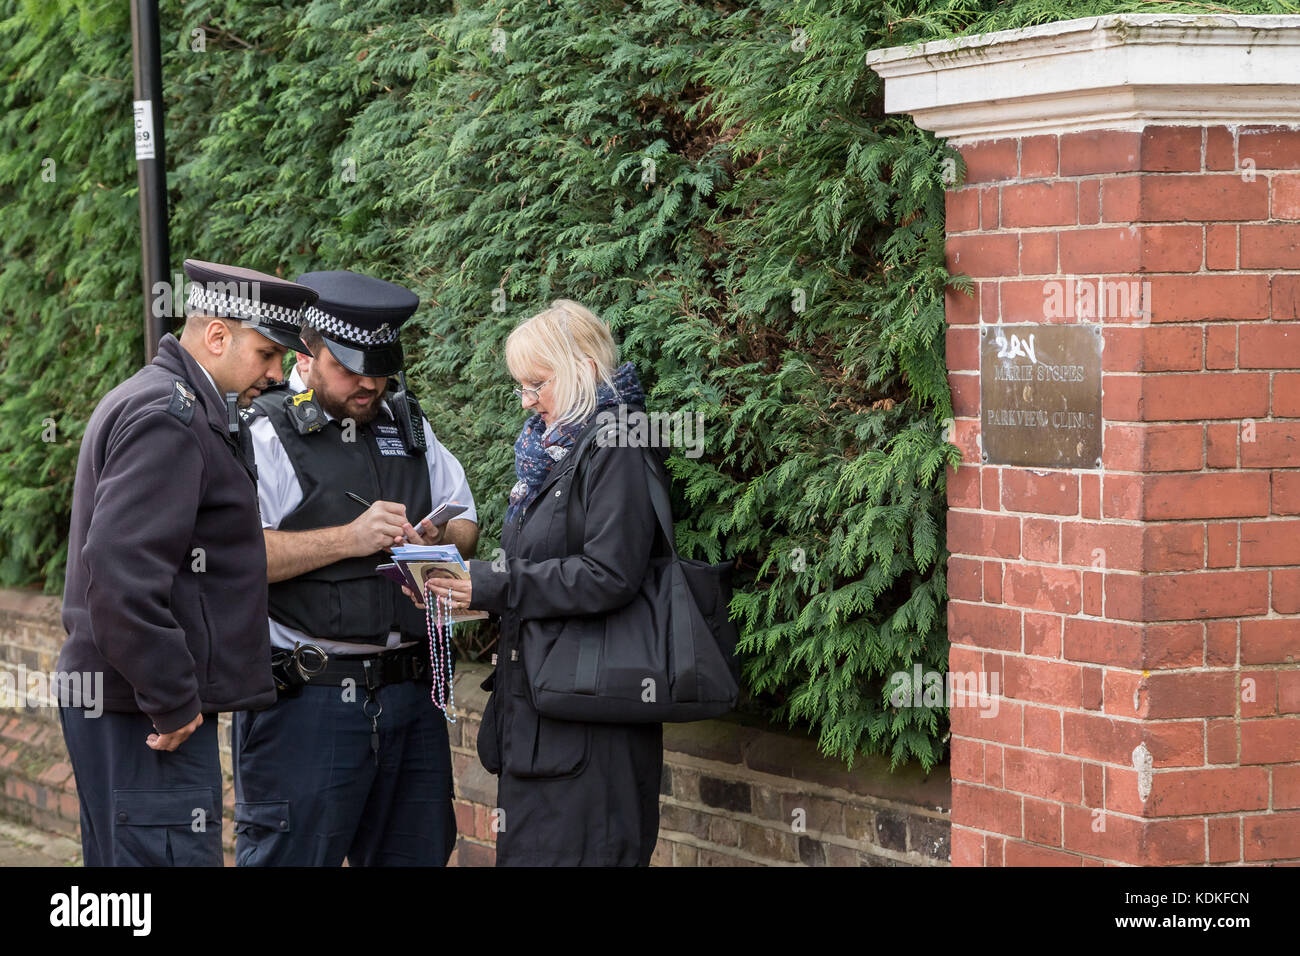 Ealing, west London, UK. 14th Oct, 2017. Christian anti-abortion protesters continue their vigils near Marie Stopes clinic in Ealing. Credit: Guy Corbishley/Alamy Live News Stock Photo